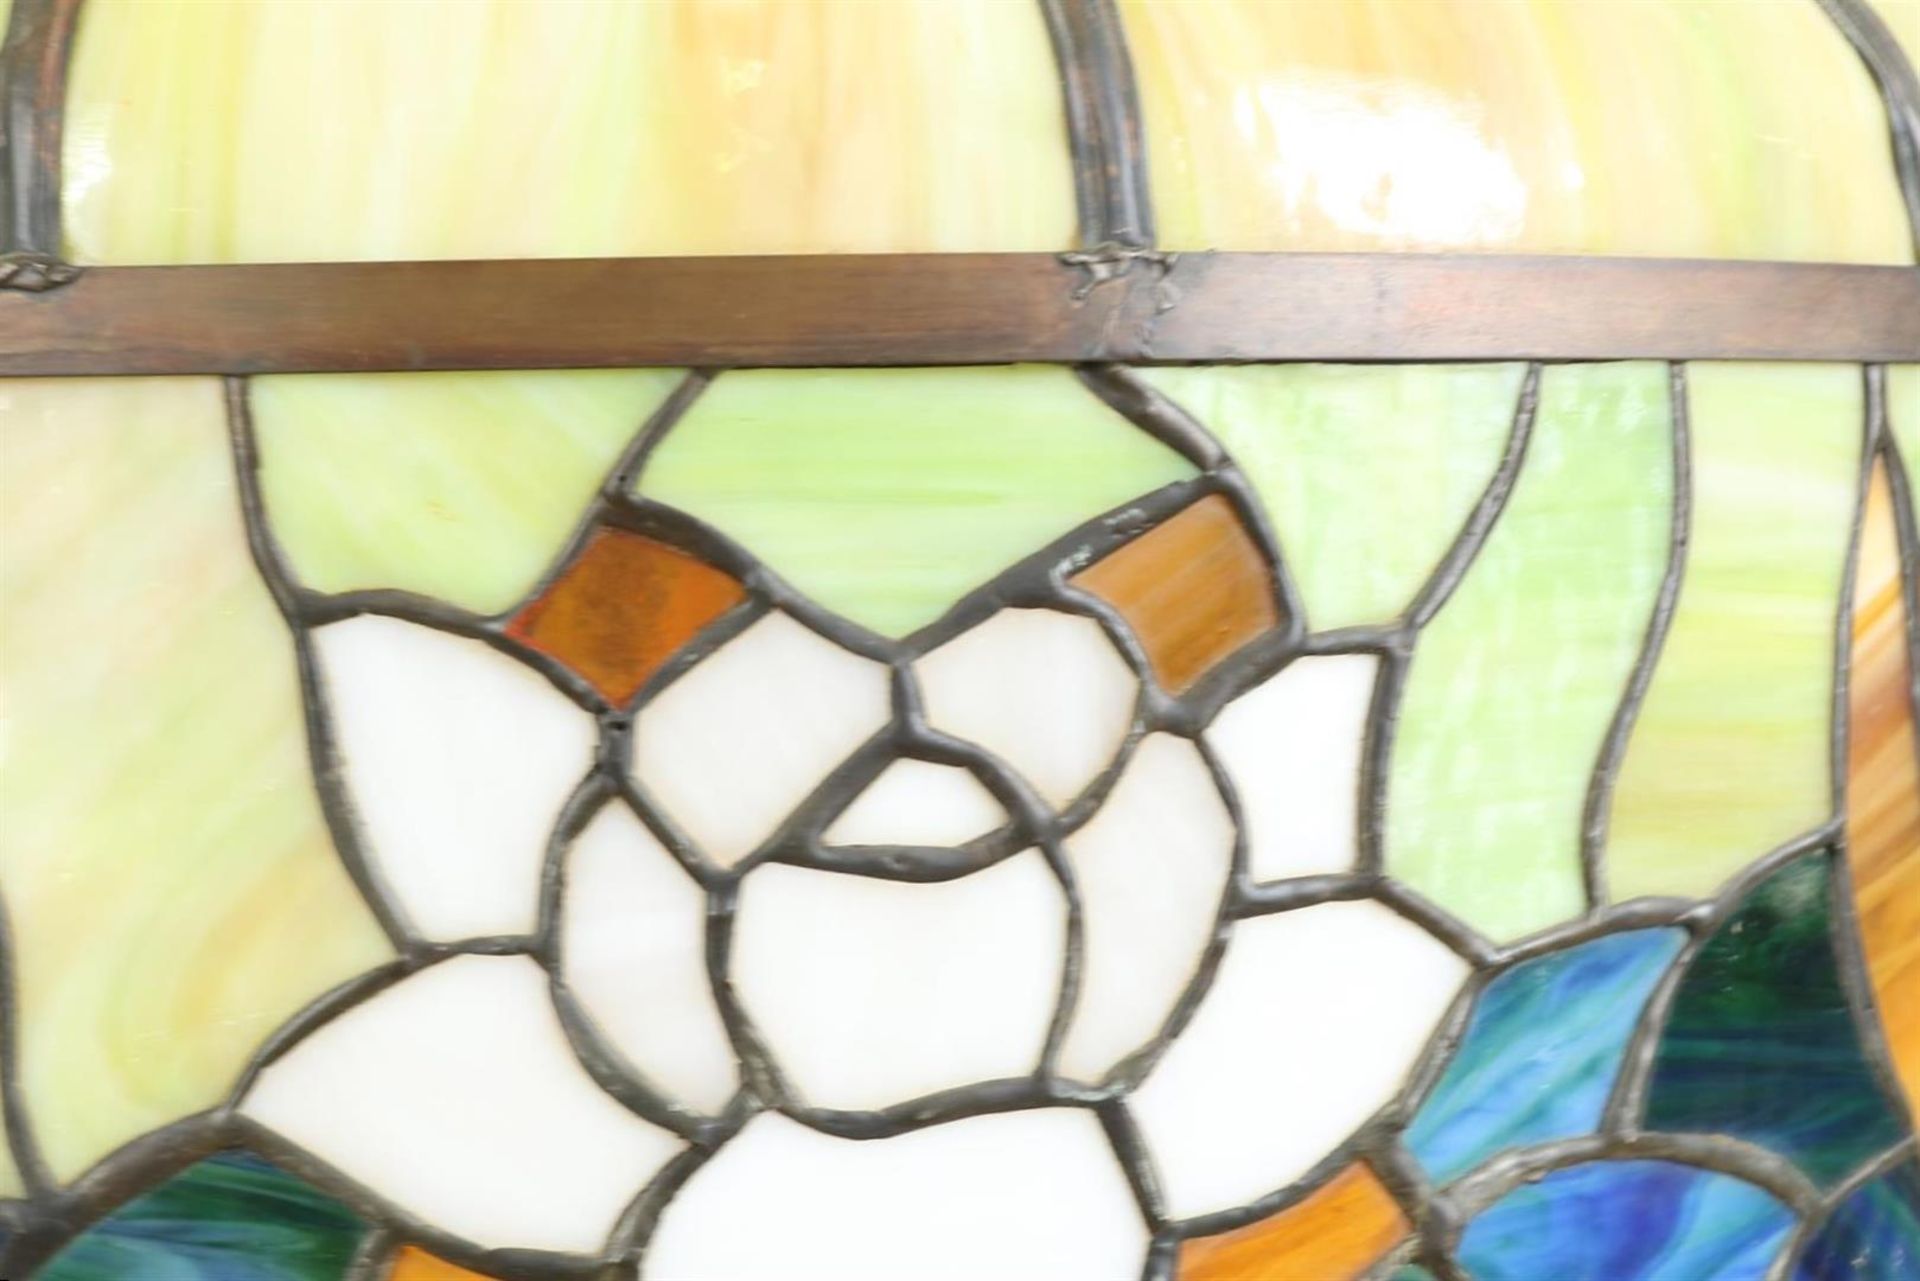 Glass Tiffany style hanging lamp with stained glass flowers, approx. 40 years old, h. 38 diam. 61 - Image 3 of 4